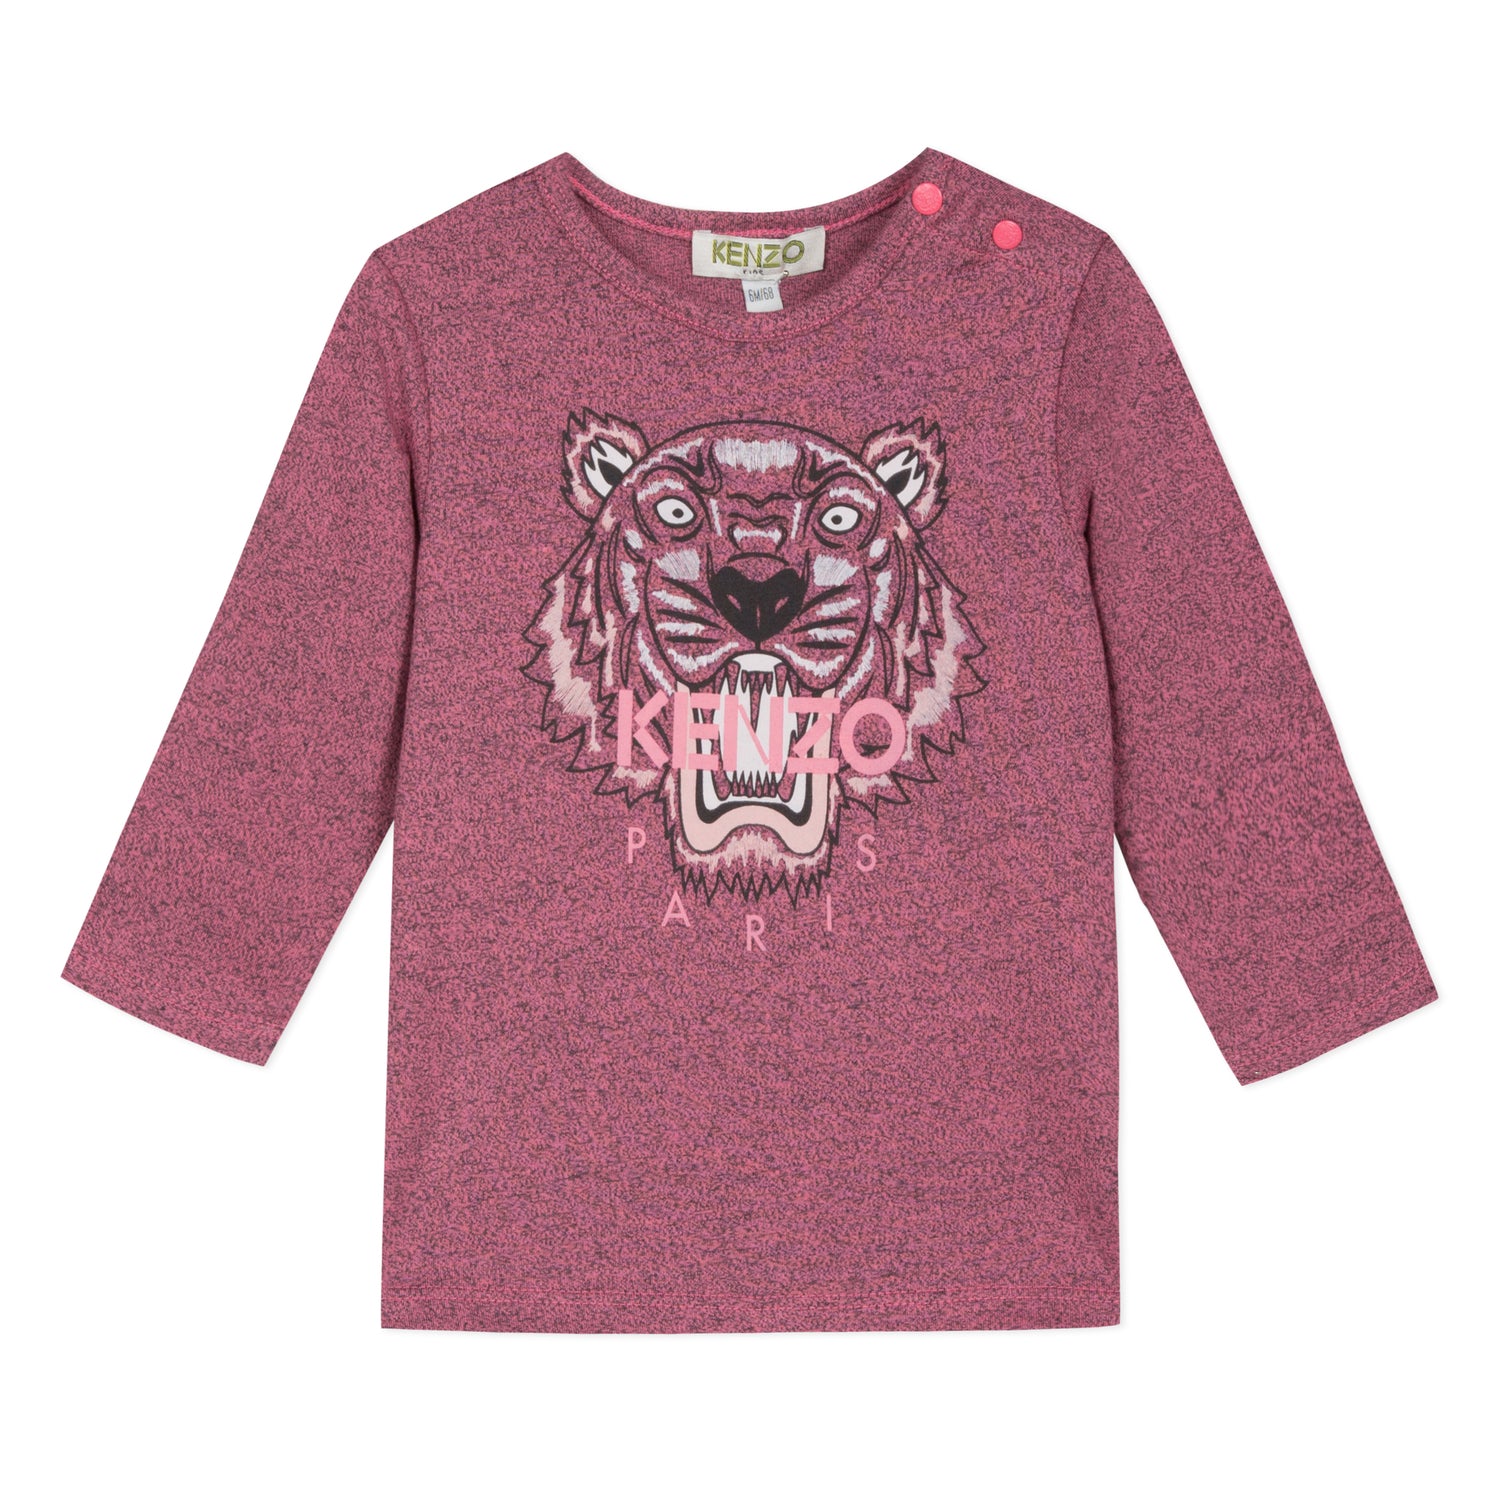 Baby Girls Bright Pink Tiger Cotton Top